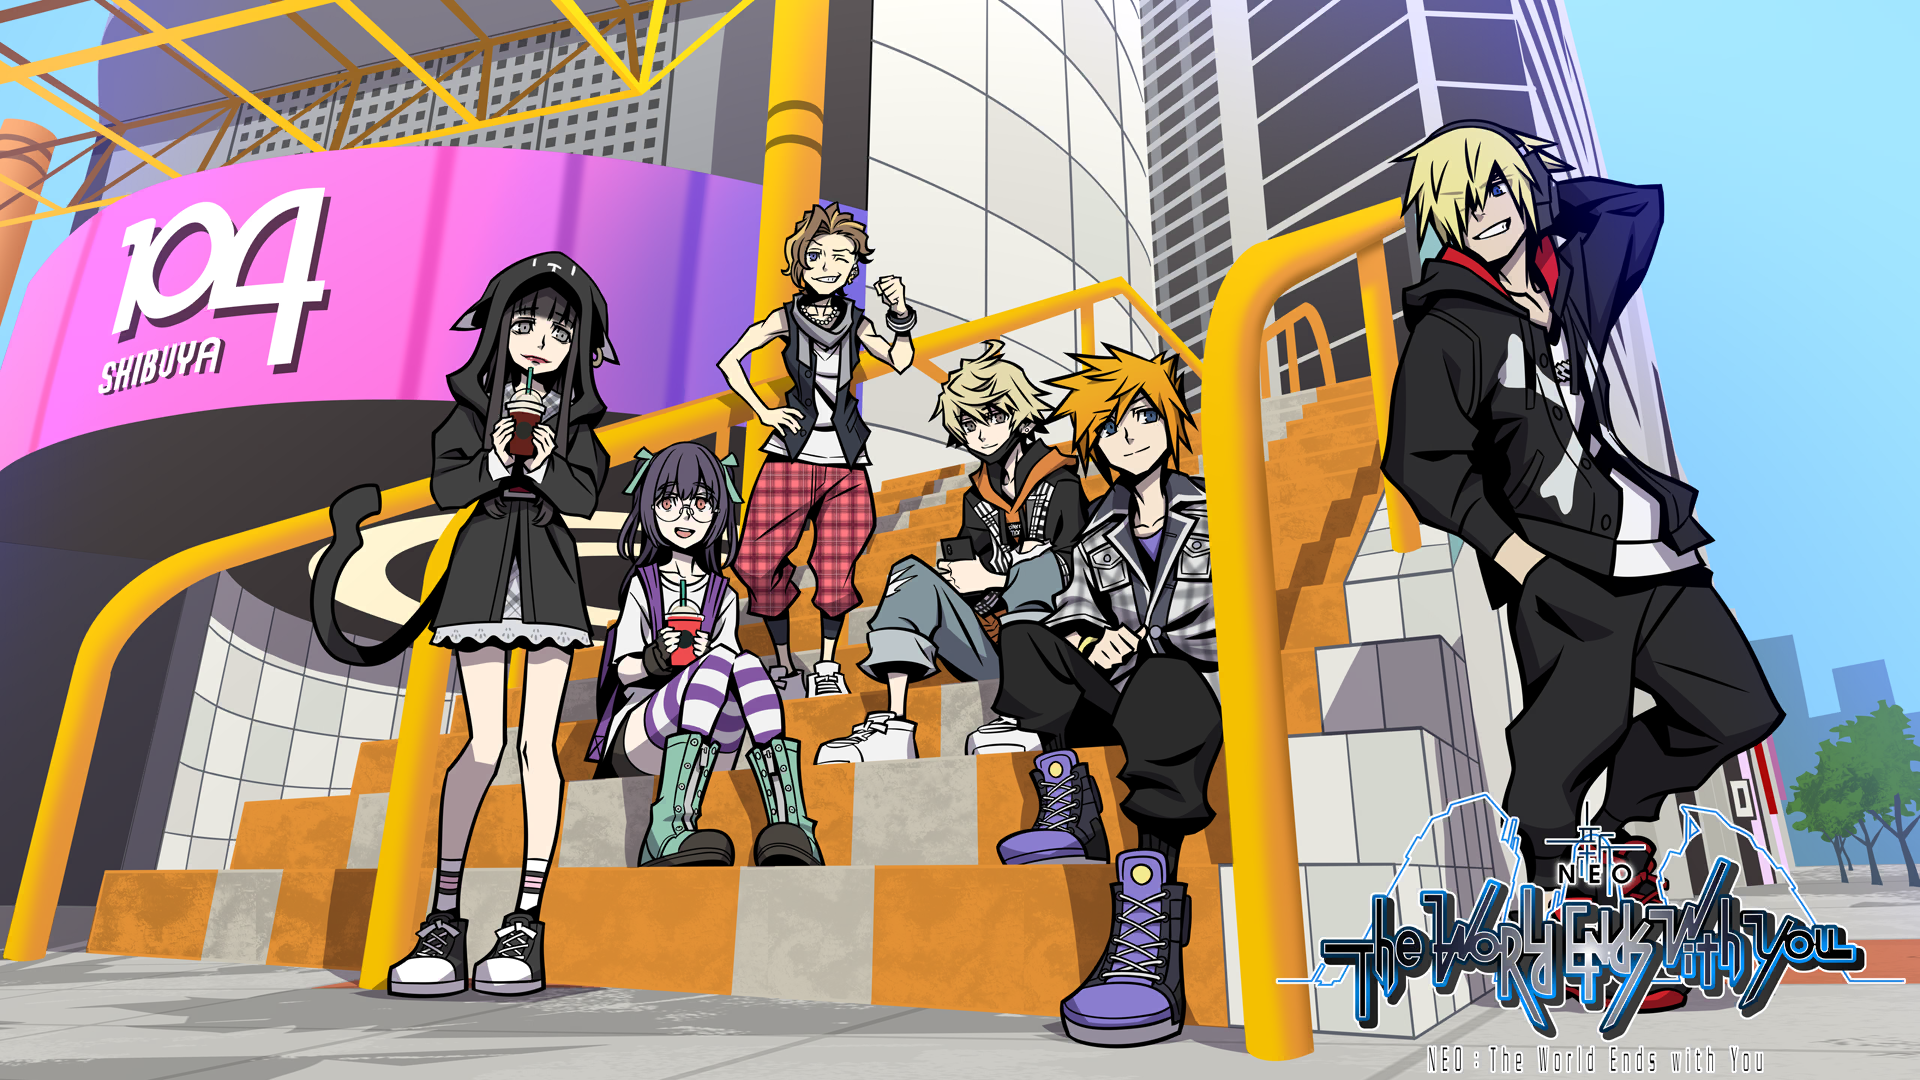 Official artwork of the main characters from Neo: The World Ends With You.